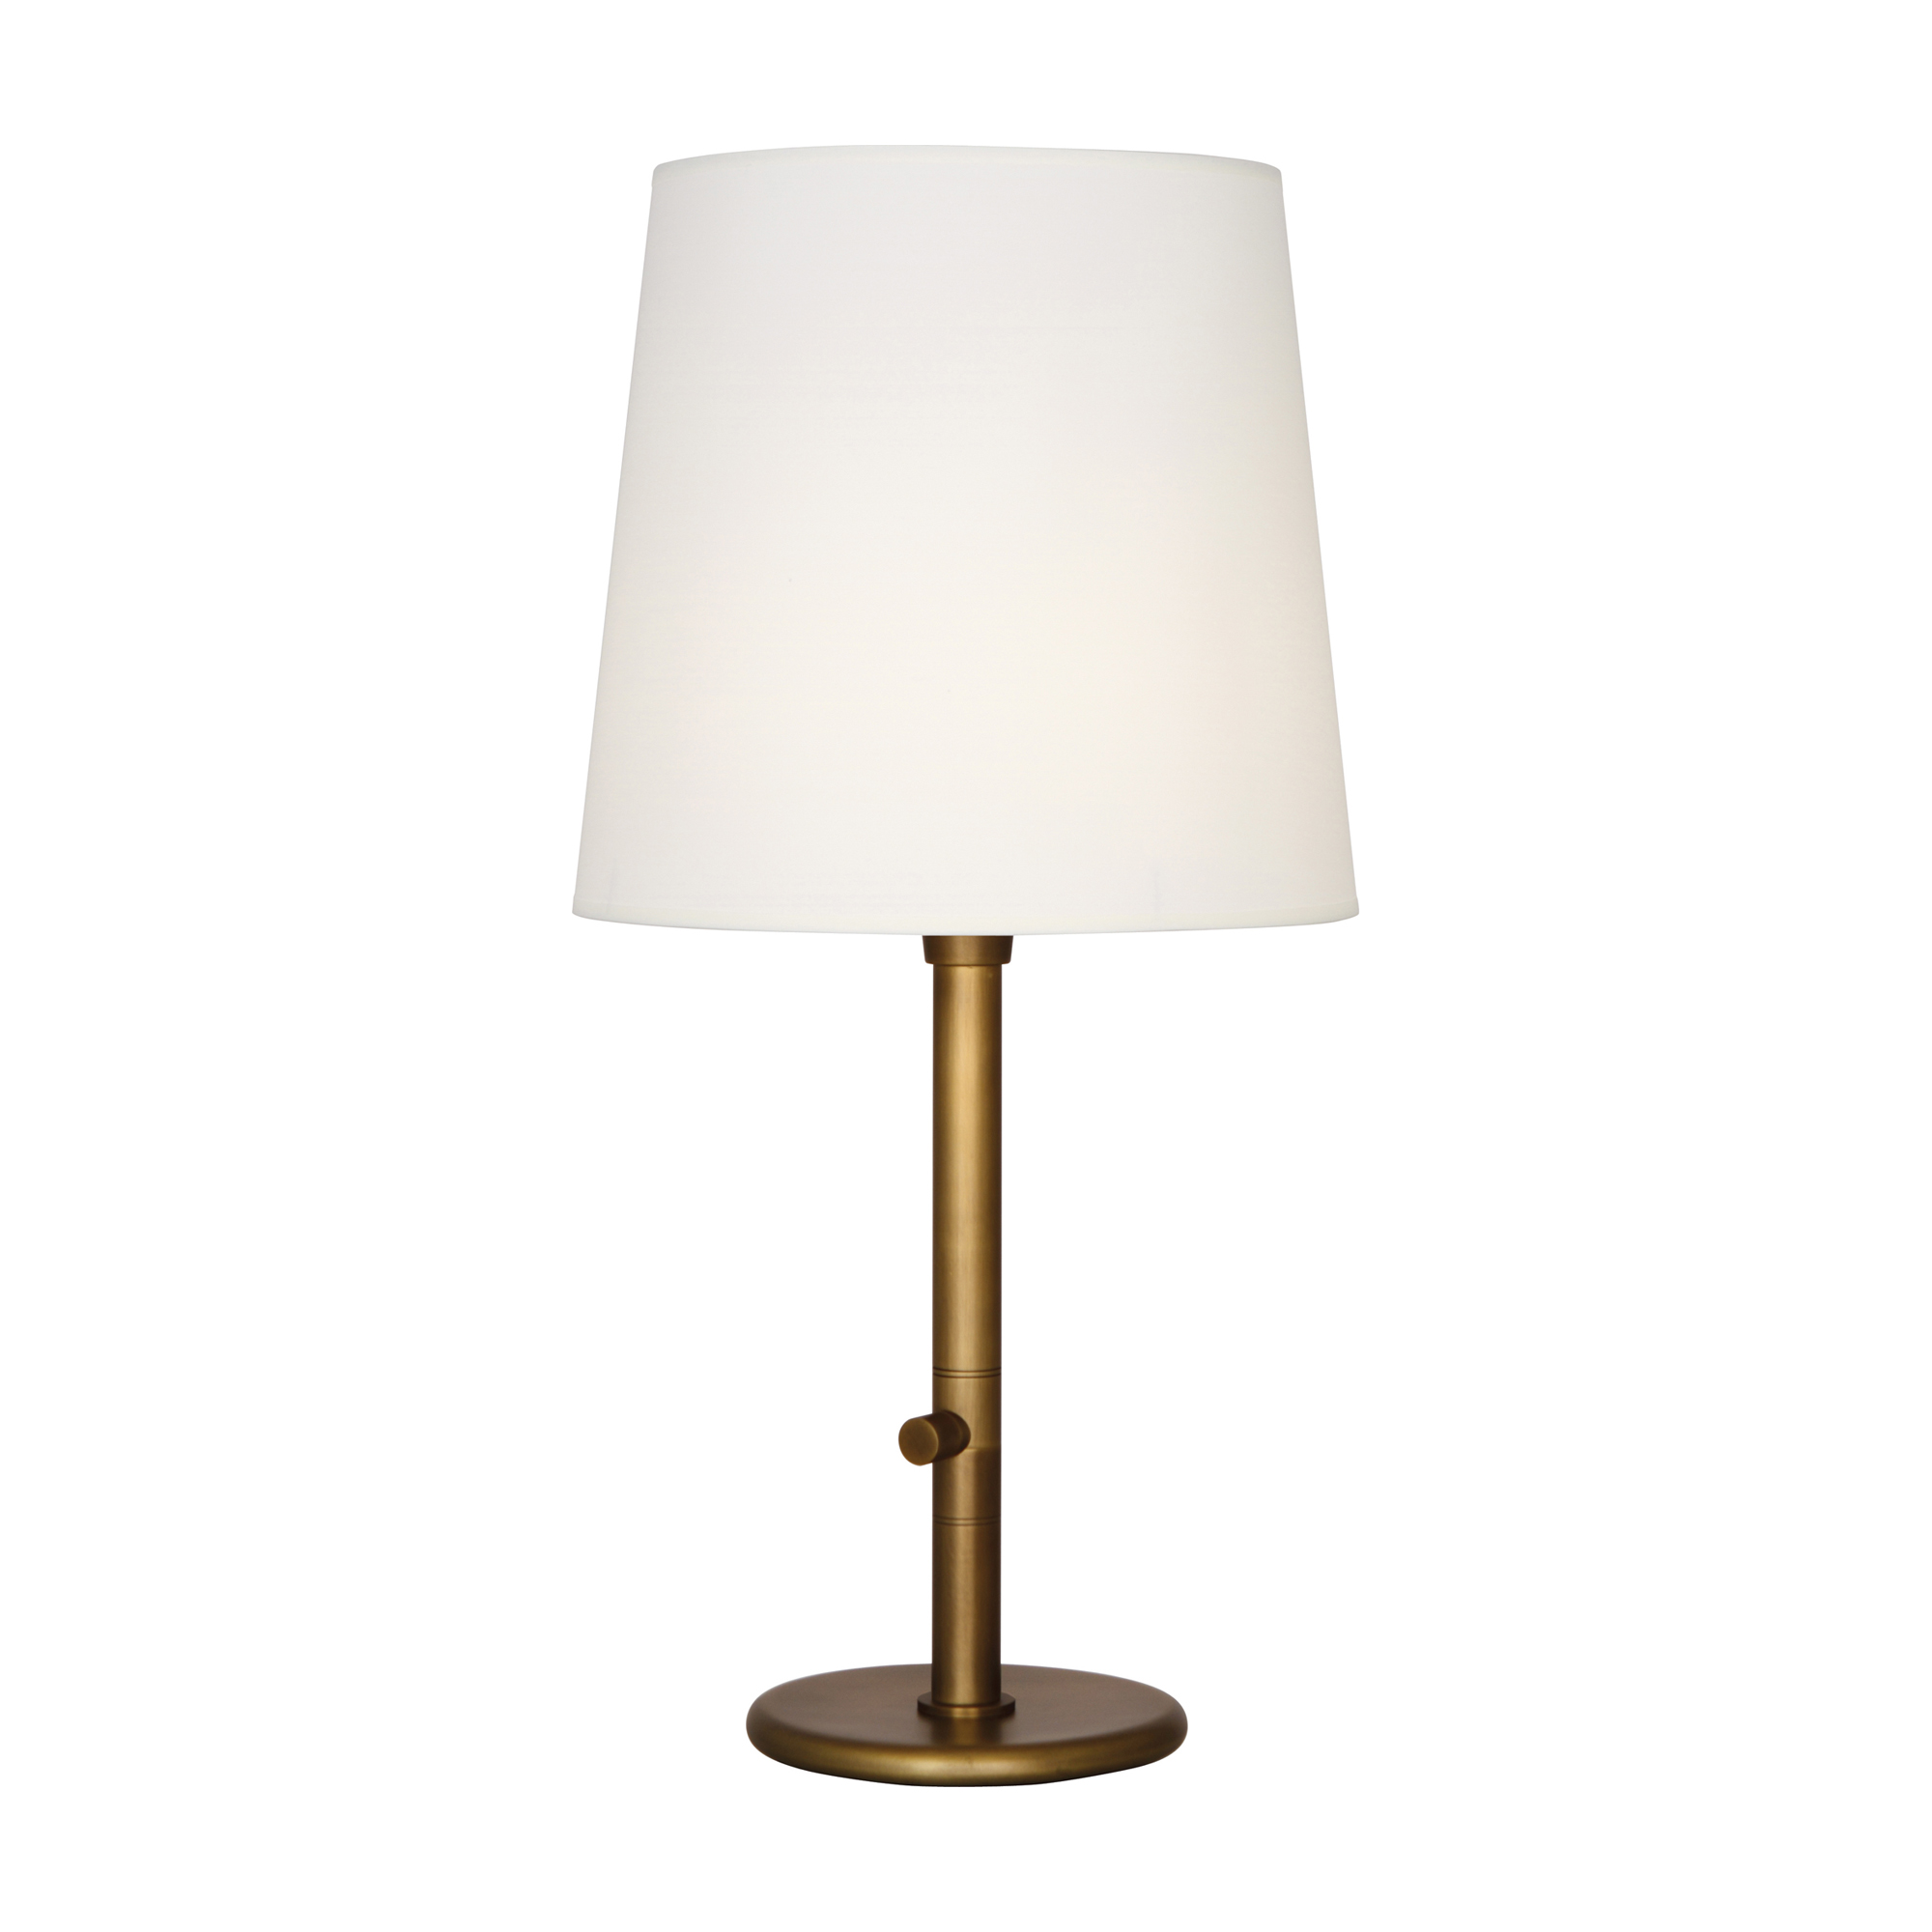 Rico Espinet Buster Chica Accent Lamp Style #2803W